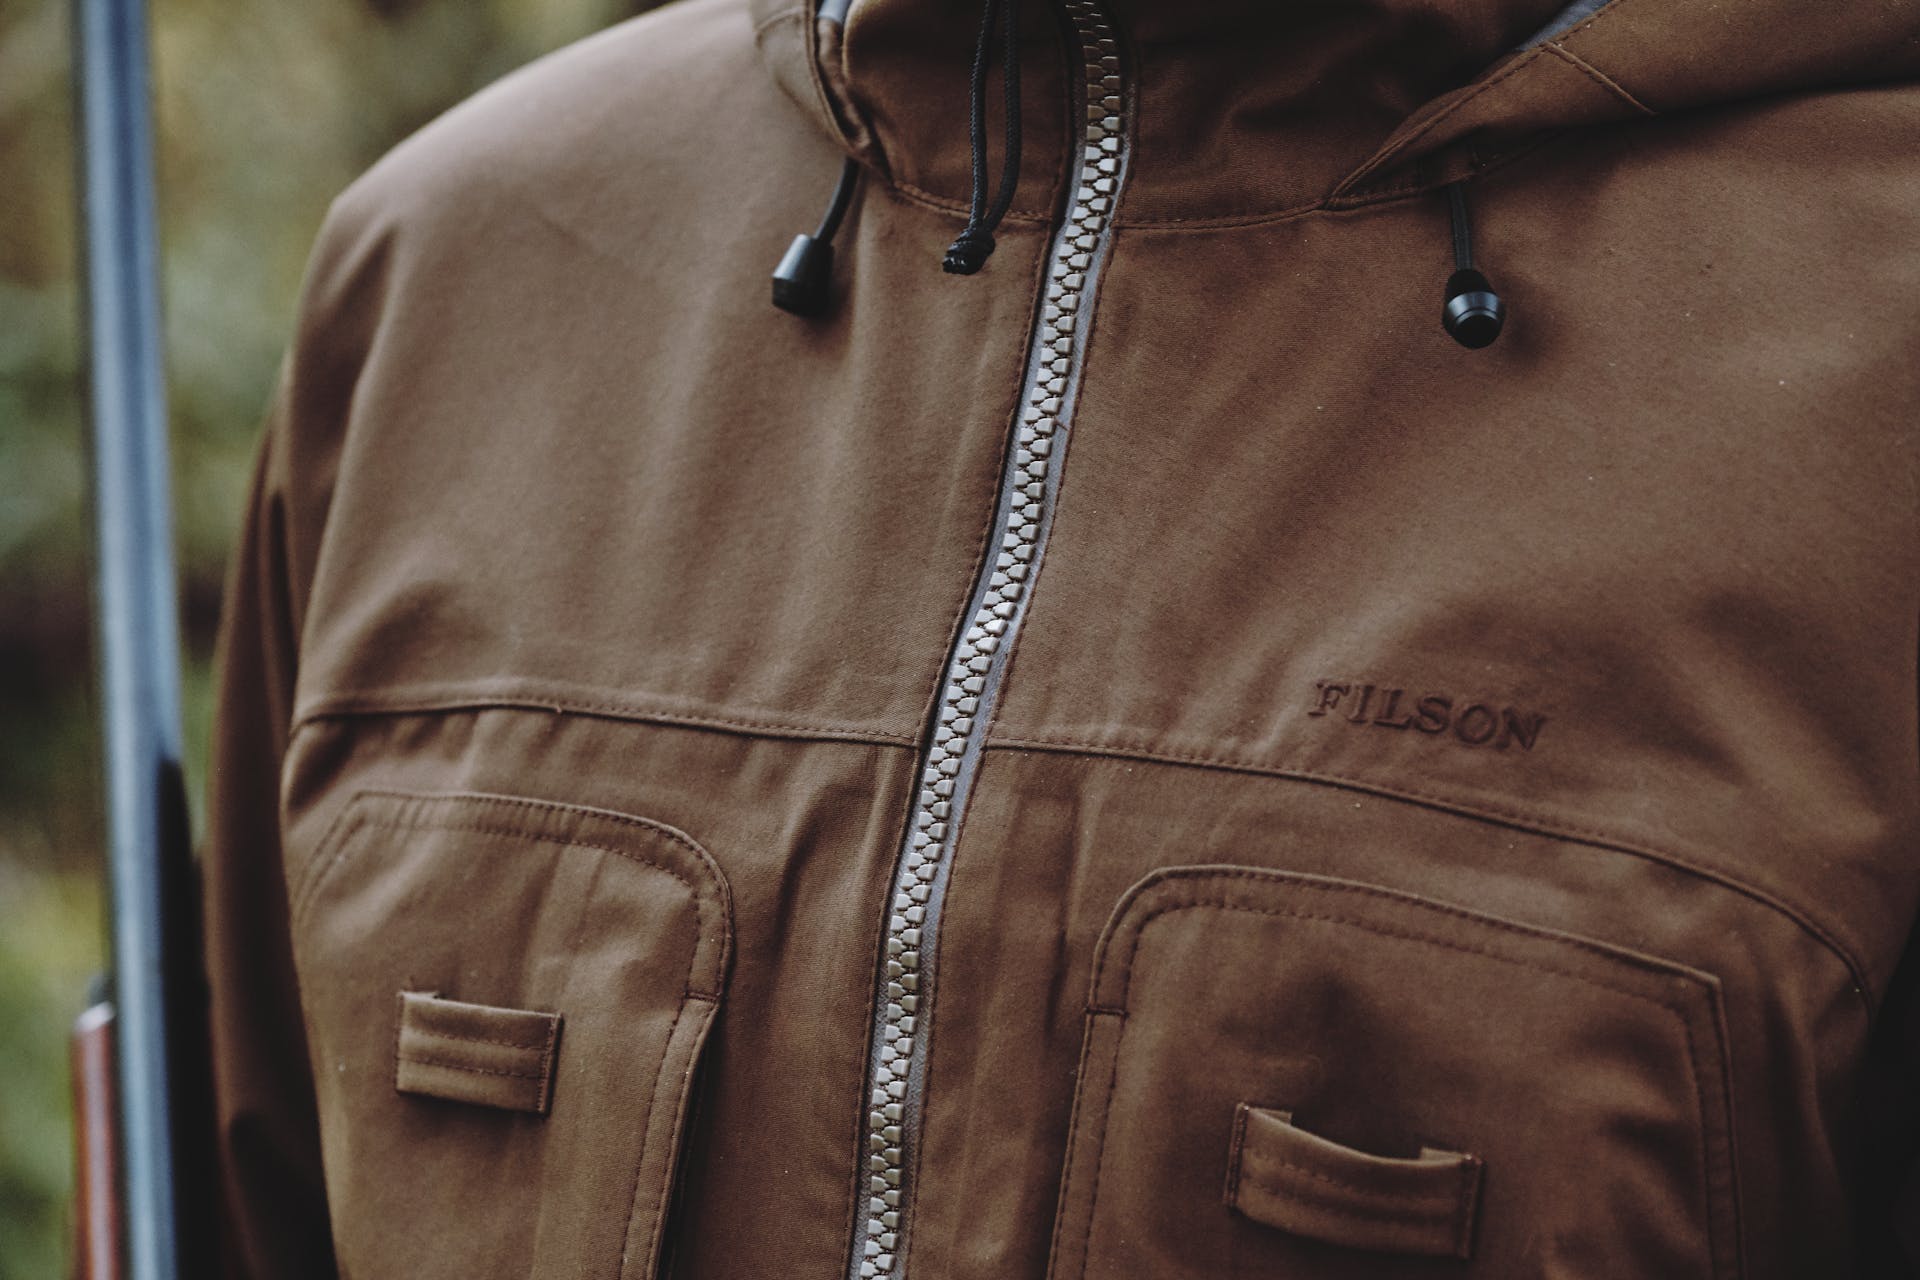 Close-up view of a Filson 3-Layer Field Jacket worn by a hunter in the field